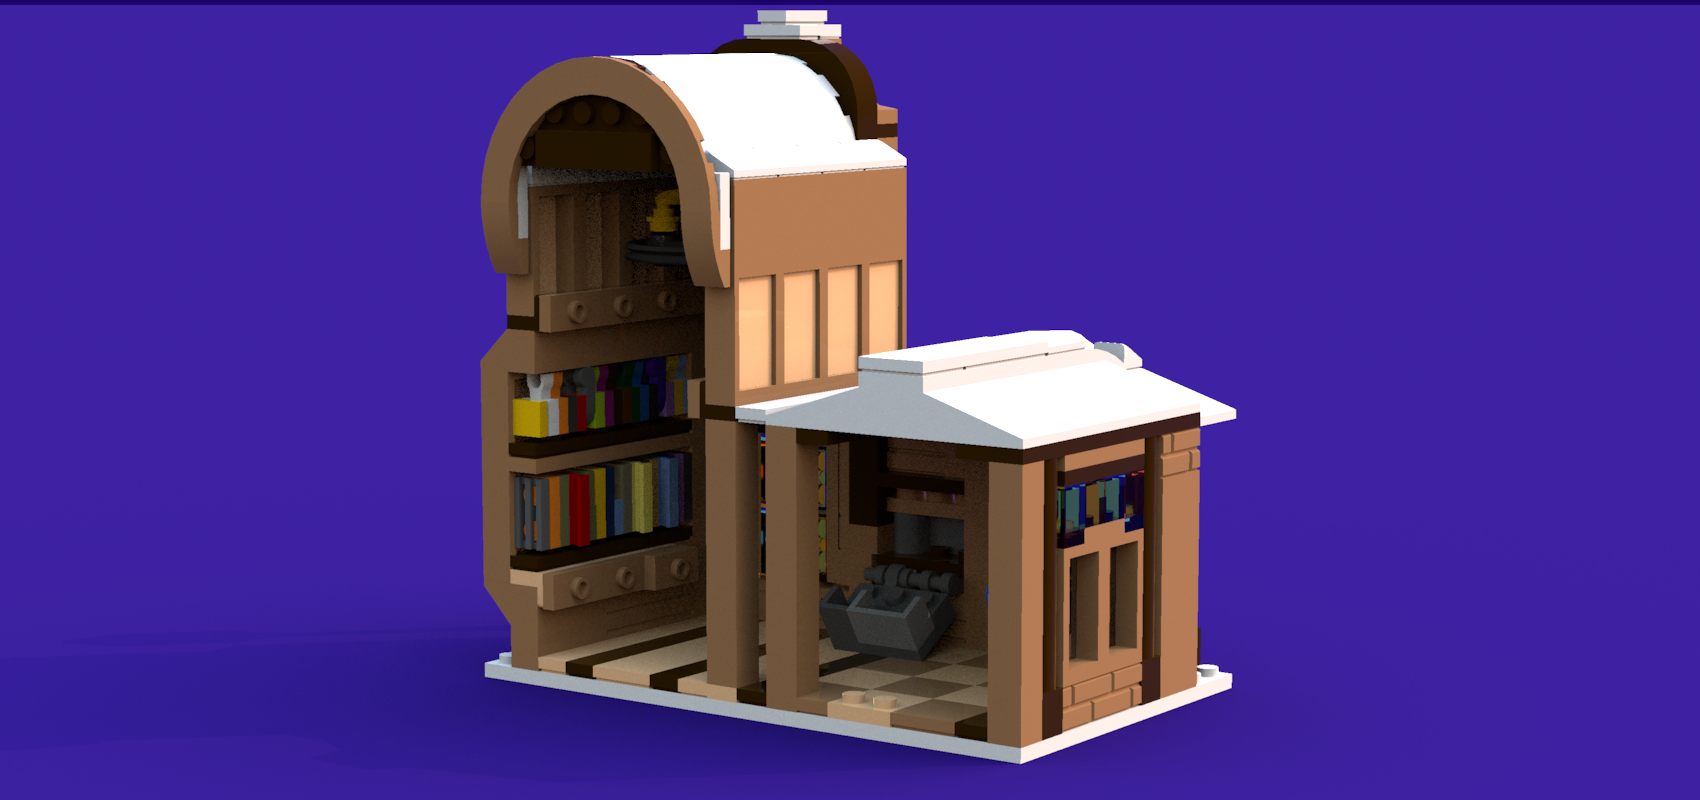 Winter Village Library Interior 2.lxf.png